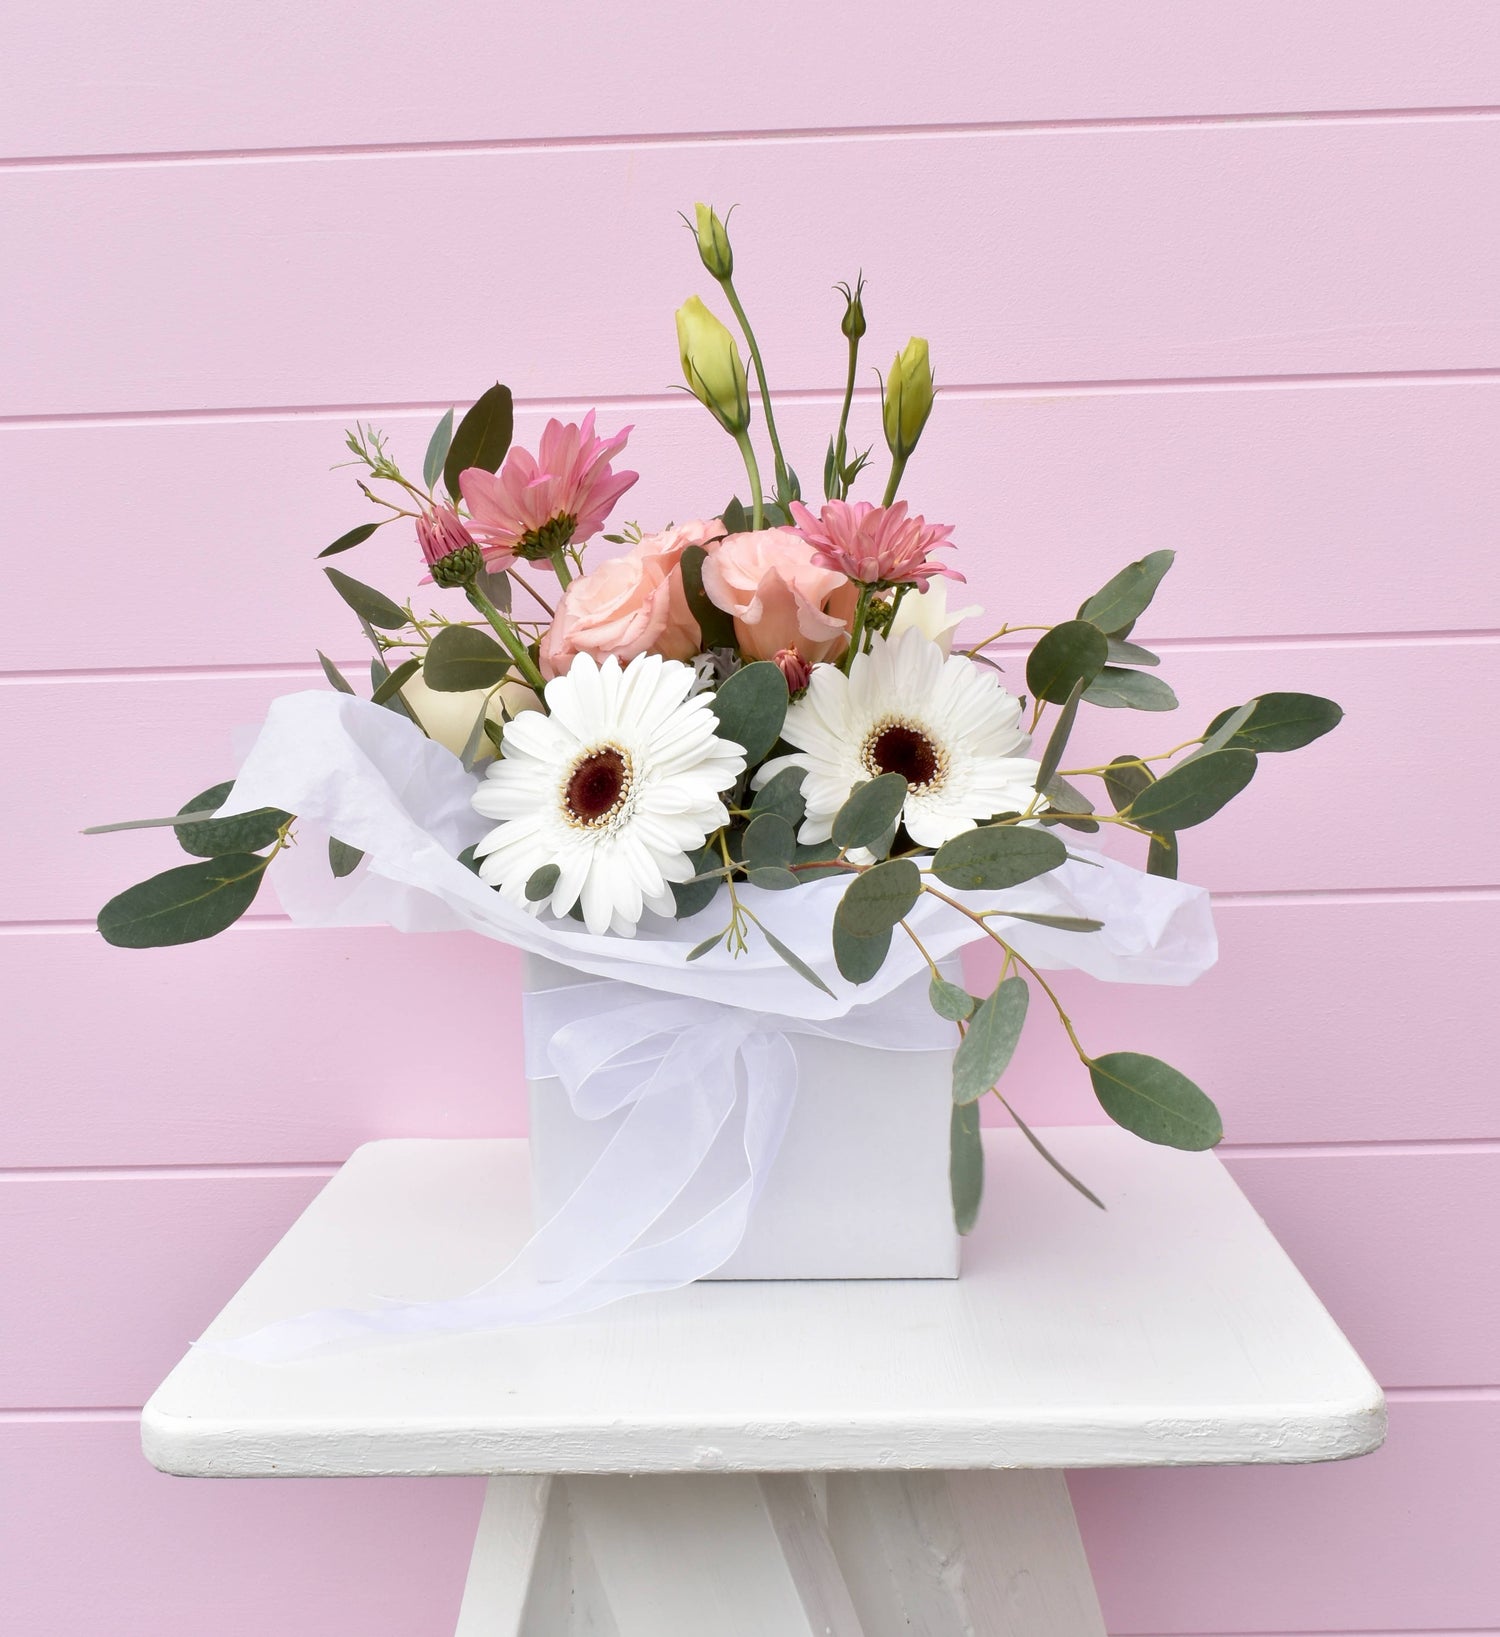 A white box containing a flower posy in white and pink